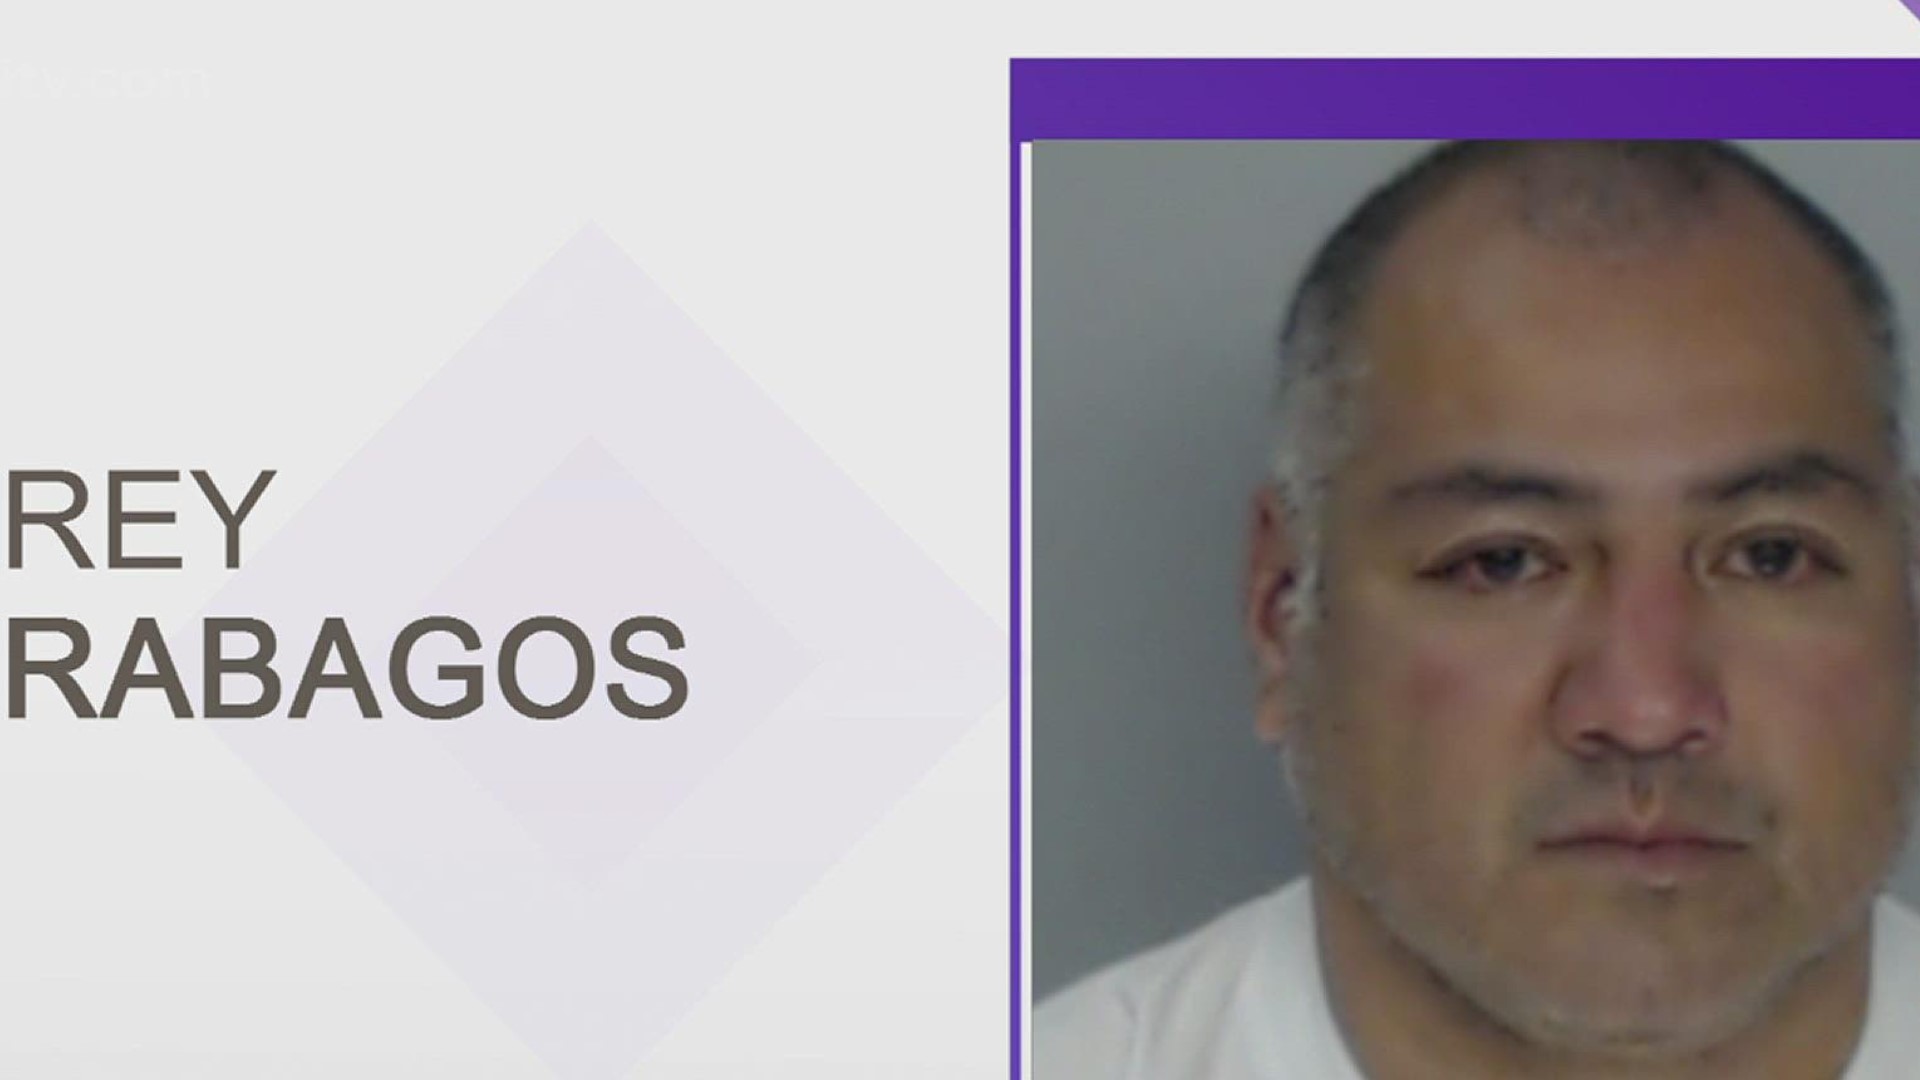 The City of Corpus Christi said the firefighter's arrest was the result of an investigation by Child Protective Services. That case has been turned over to the CCPD.